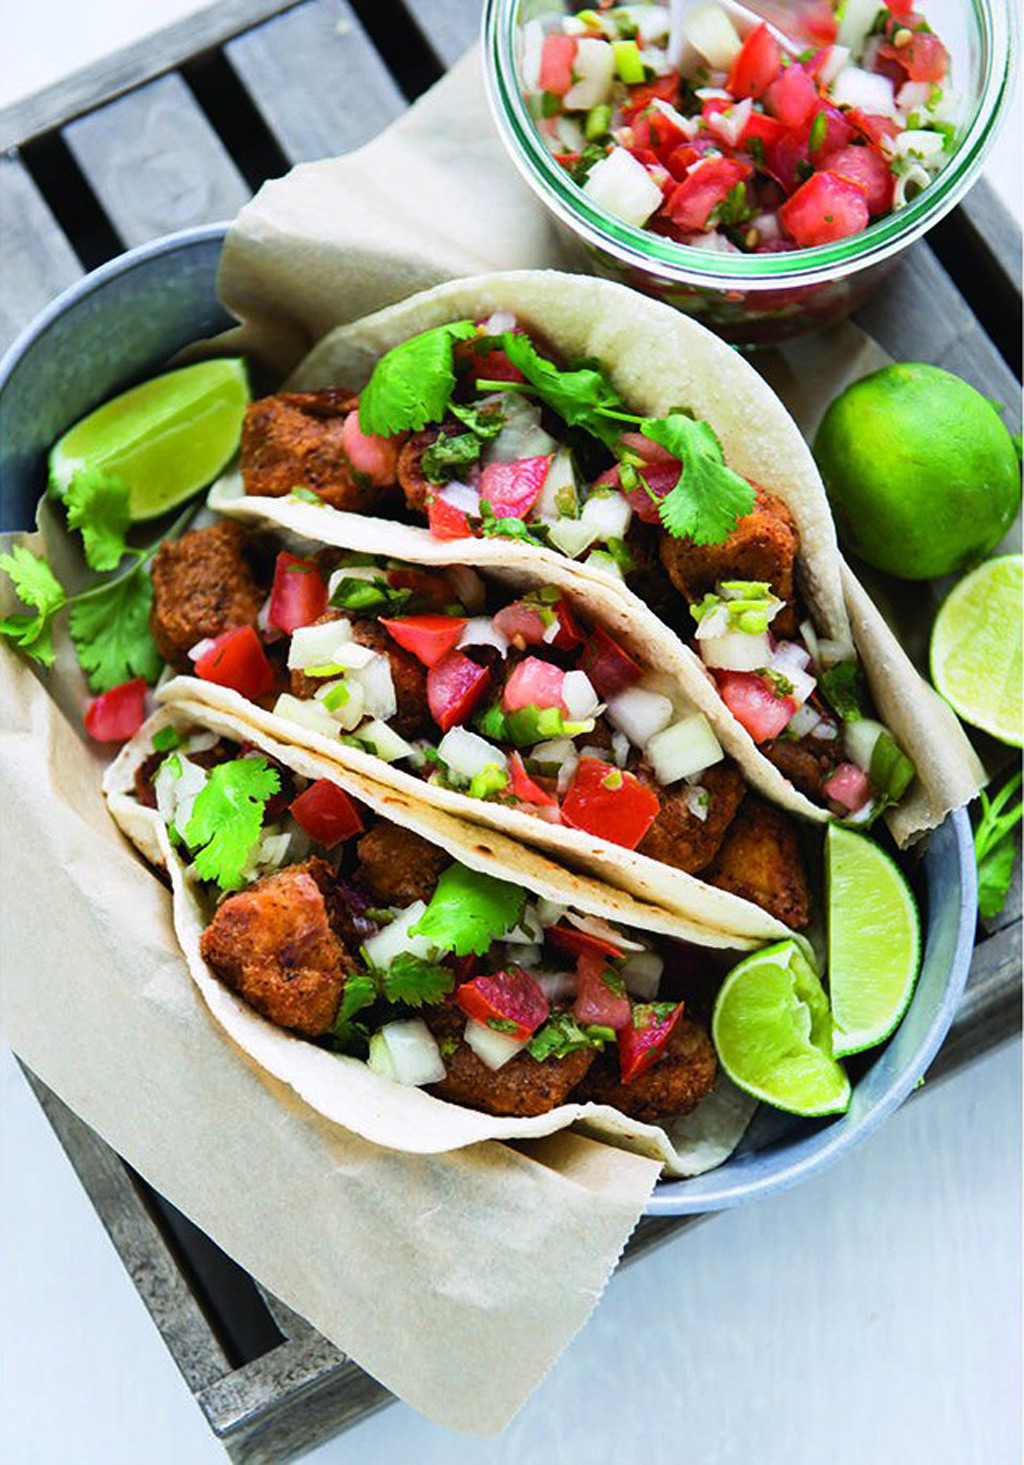 Easy Fish Tacos with Pico de Gallo from 100 Days of Real Food